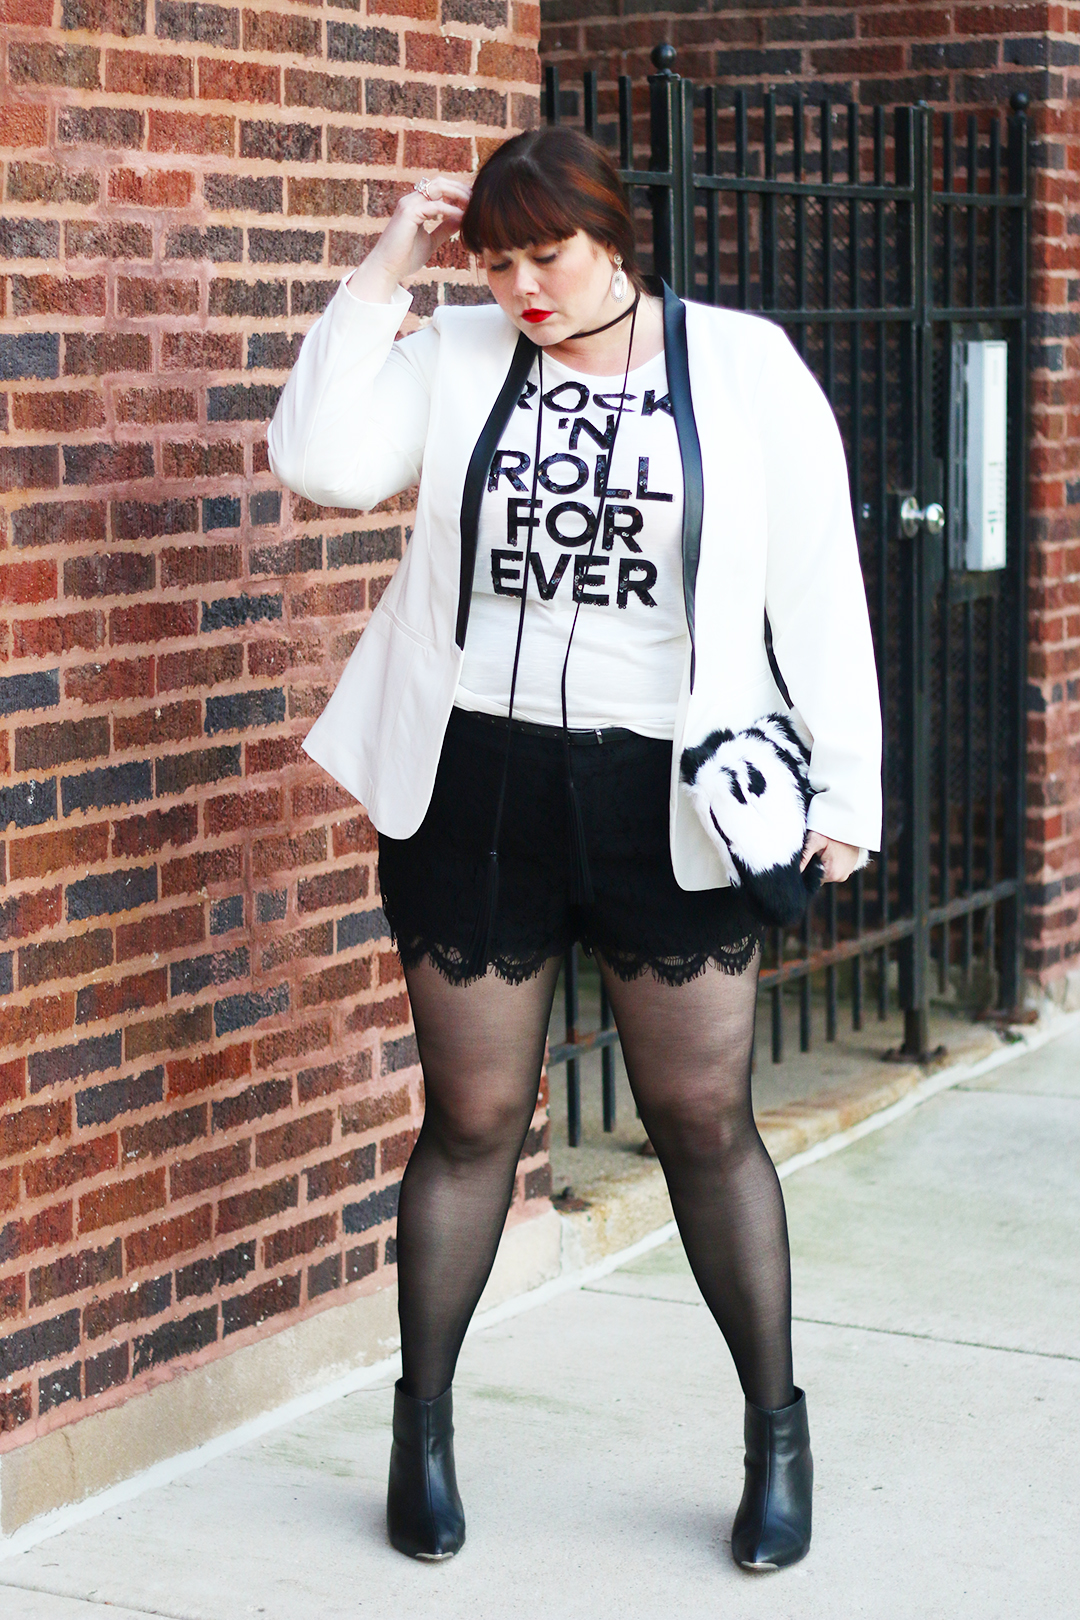 Plus Size Holiday Looks from Torrid: Rock ‘n Roll Tshirt